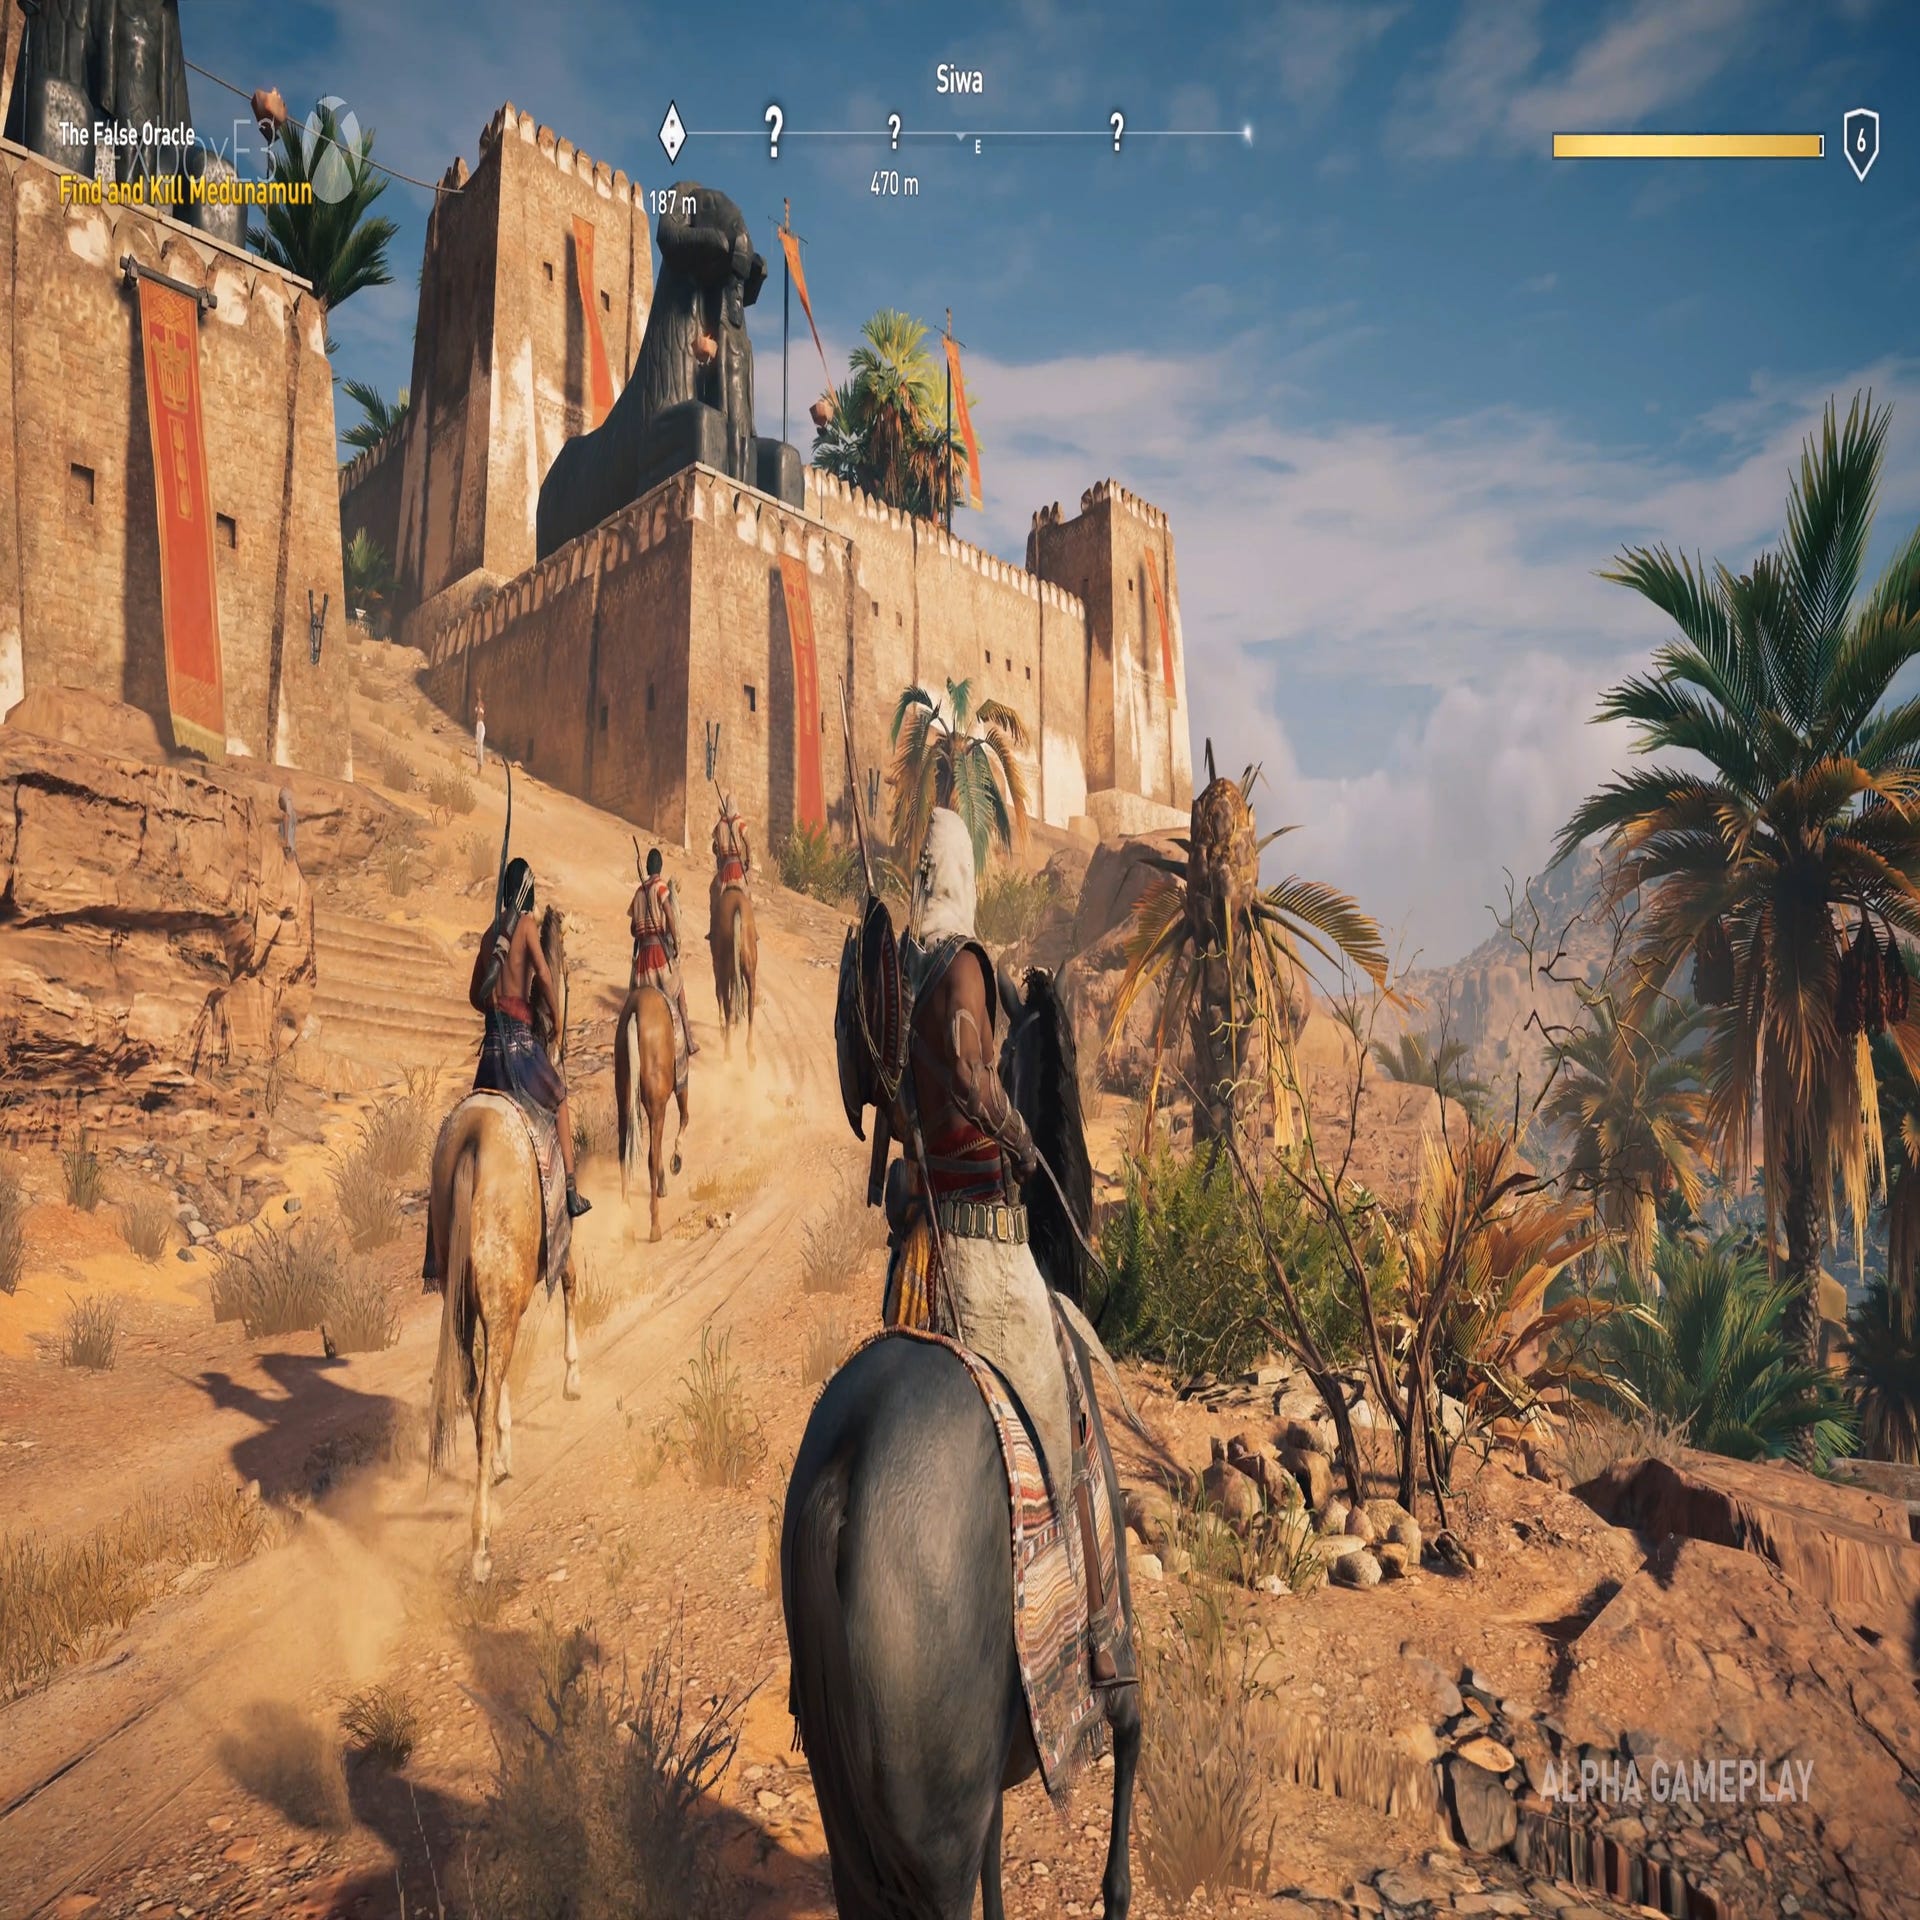 Assassin's Creed Origins on Xbox One X: can third parties hit 4K?